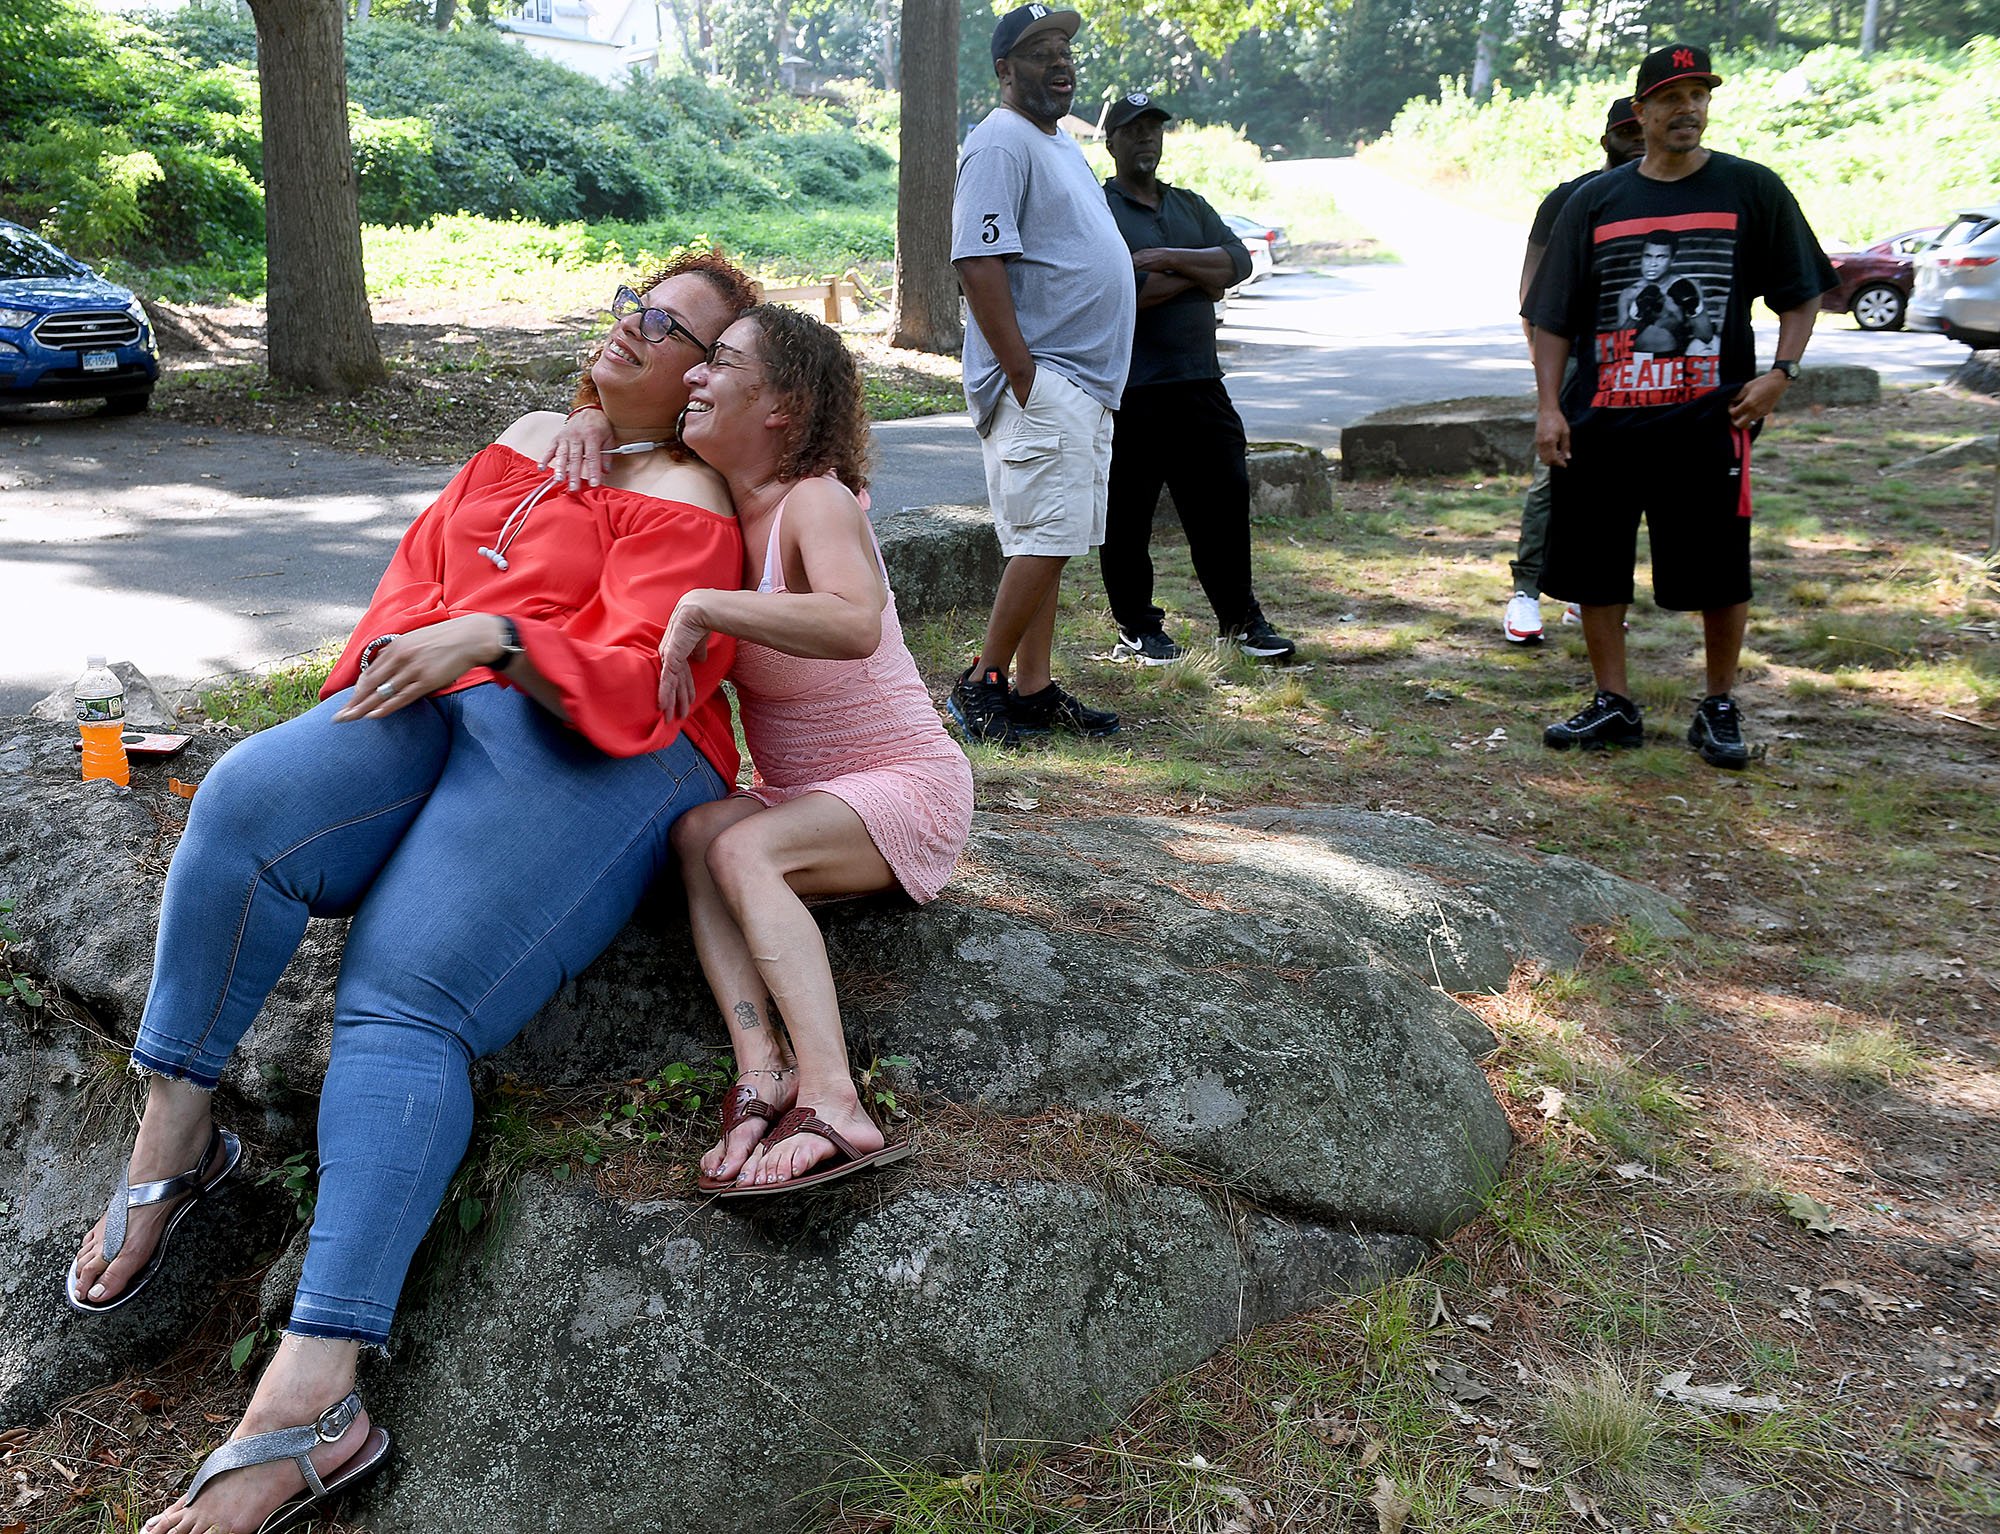  Friends Linda I David-Paul, left, and Cathy Hudak hug as they talk during a reunion for formal Thames River Apartments residents at Riverside Park in New London on Saturday, August 27, 2022. The two women grew up in the towers on Crystal Ave tougher